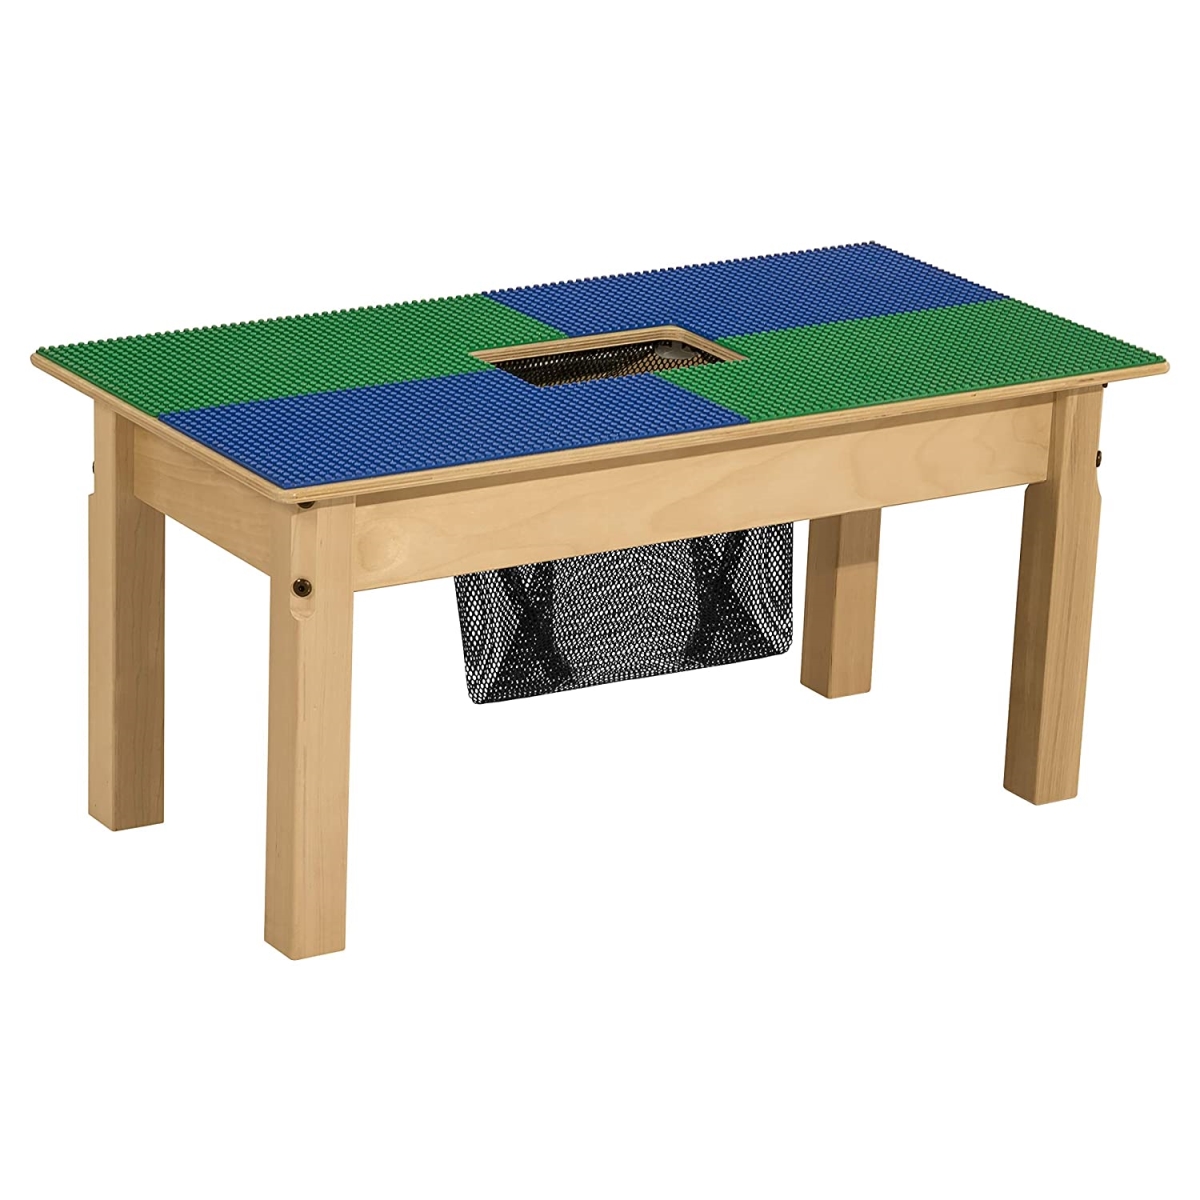 Tp1631sgn14-bg 14 In. Lego Compatible Table With Legs, Blue & Green - Rectangle